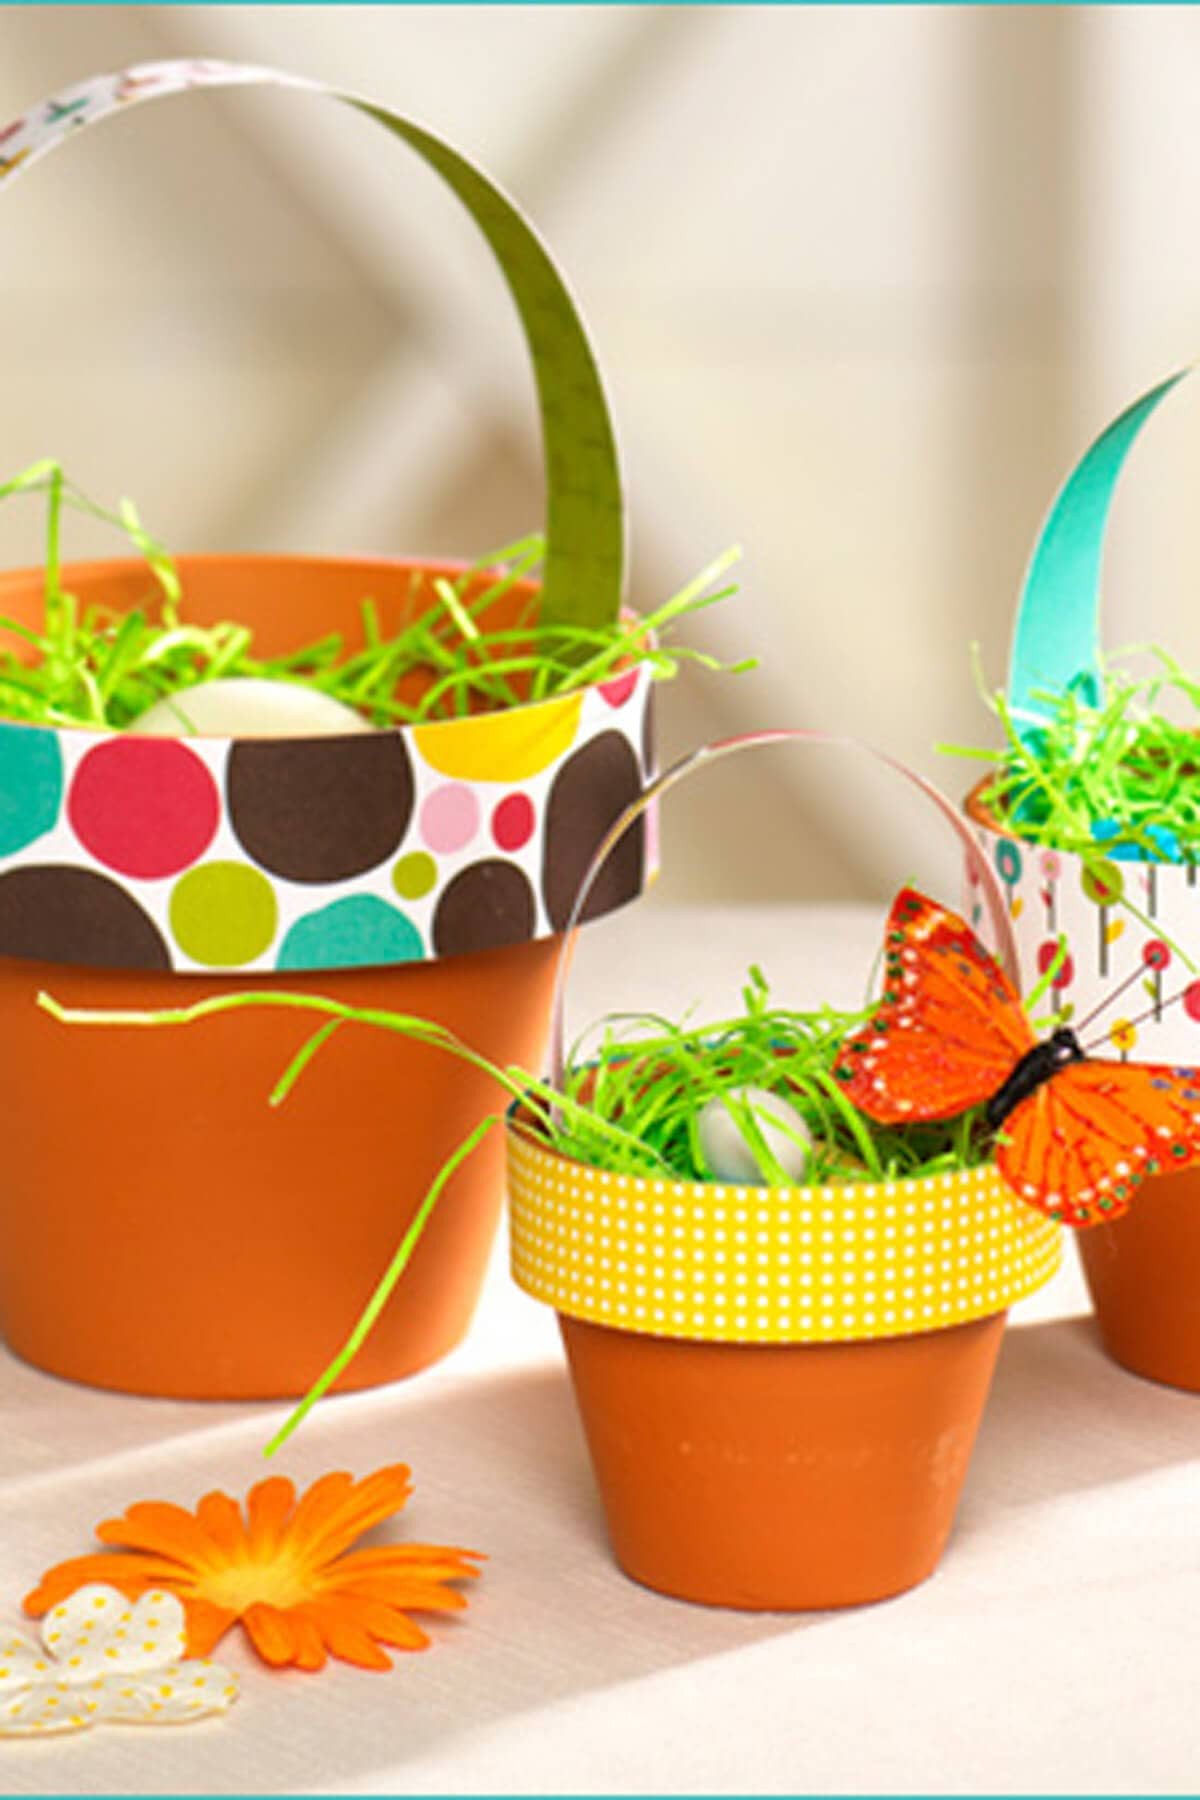 Diy For Easter
 25 Creative DIY Easter Basket Ideas that Can Be Done in